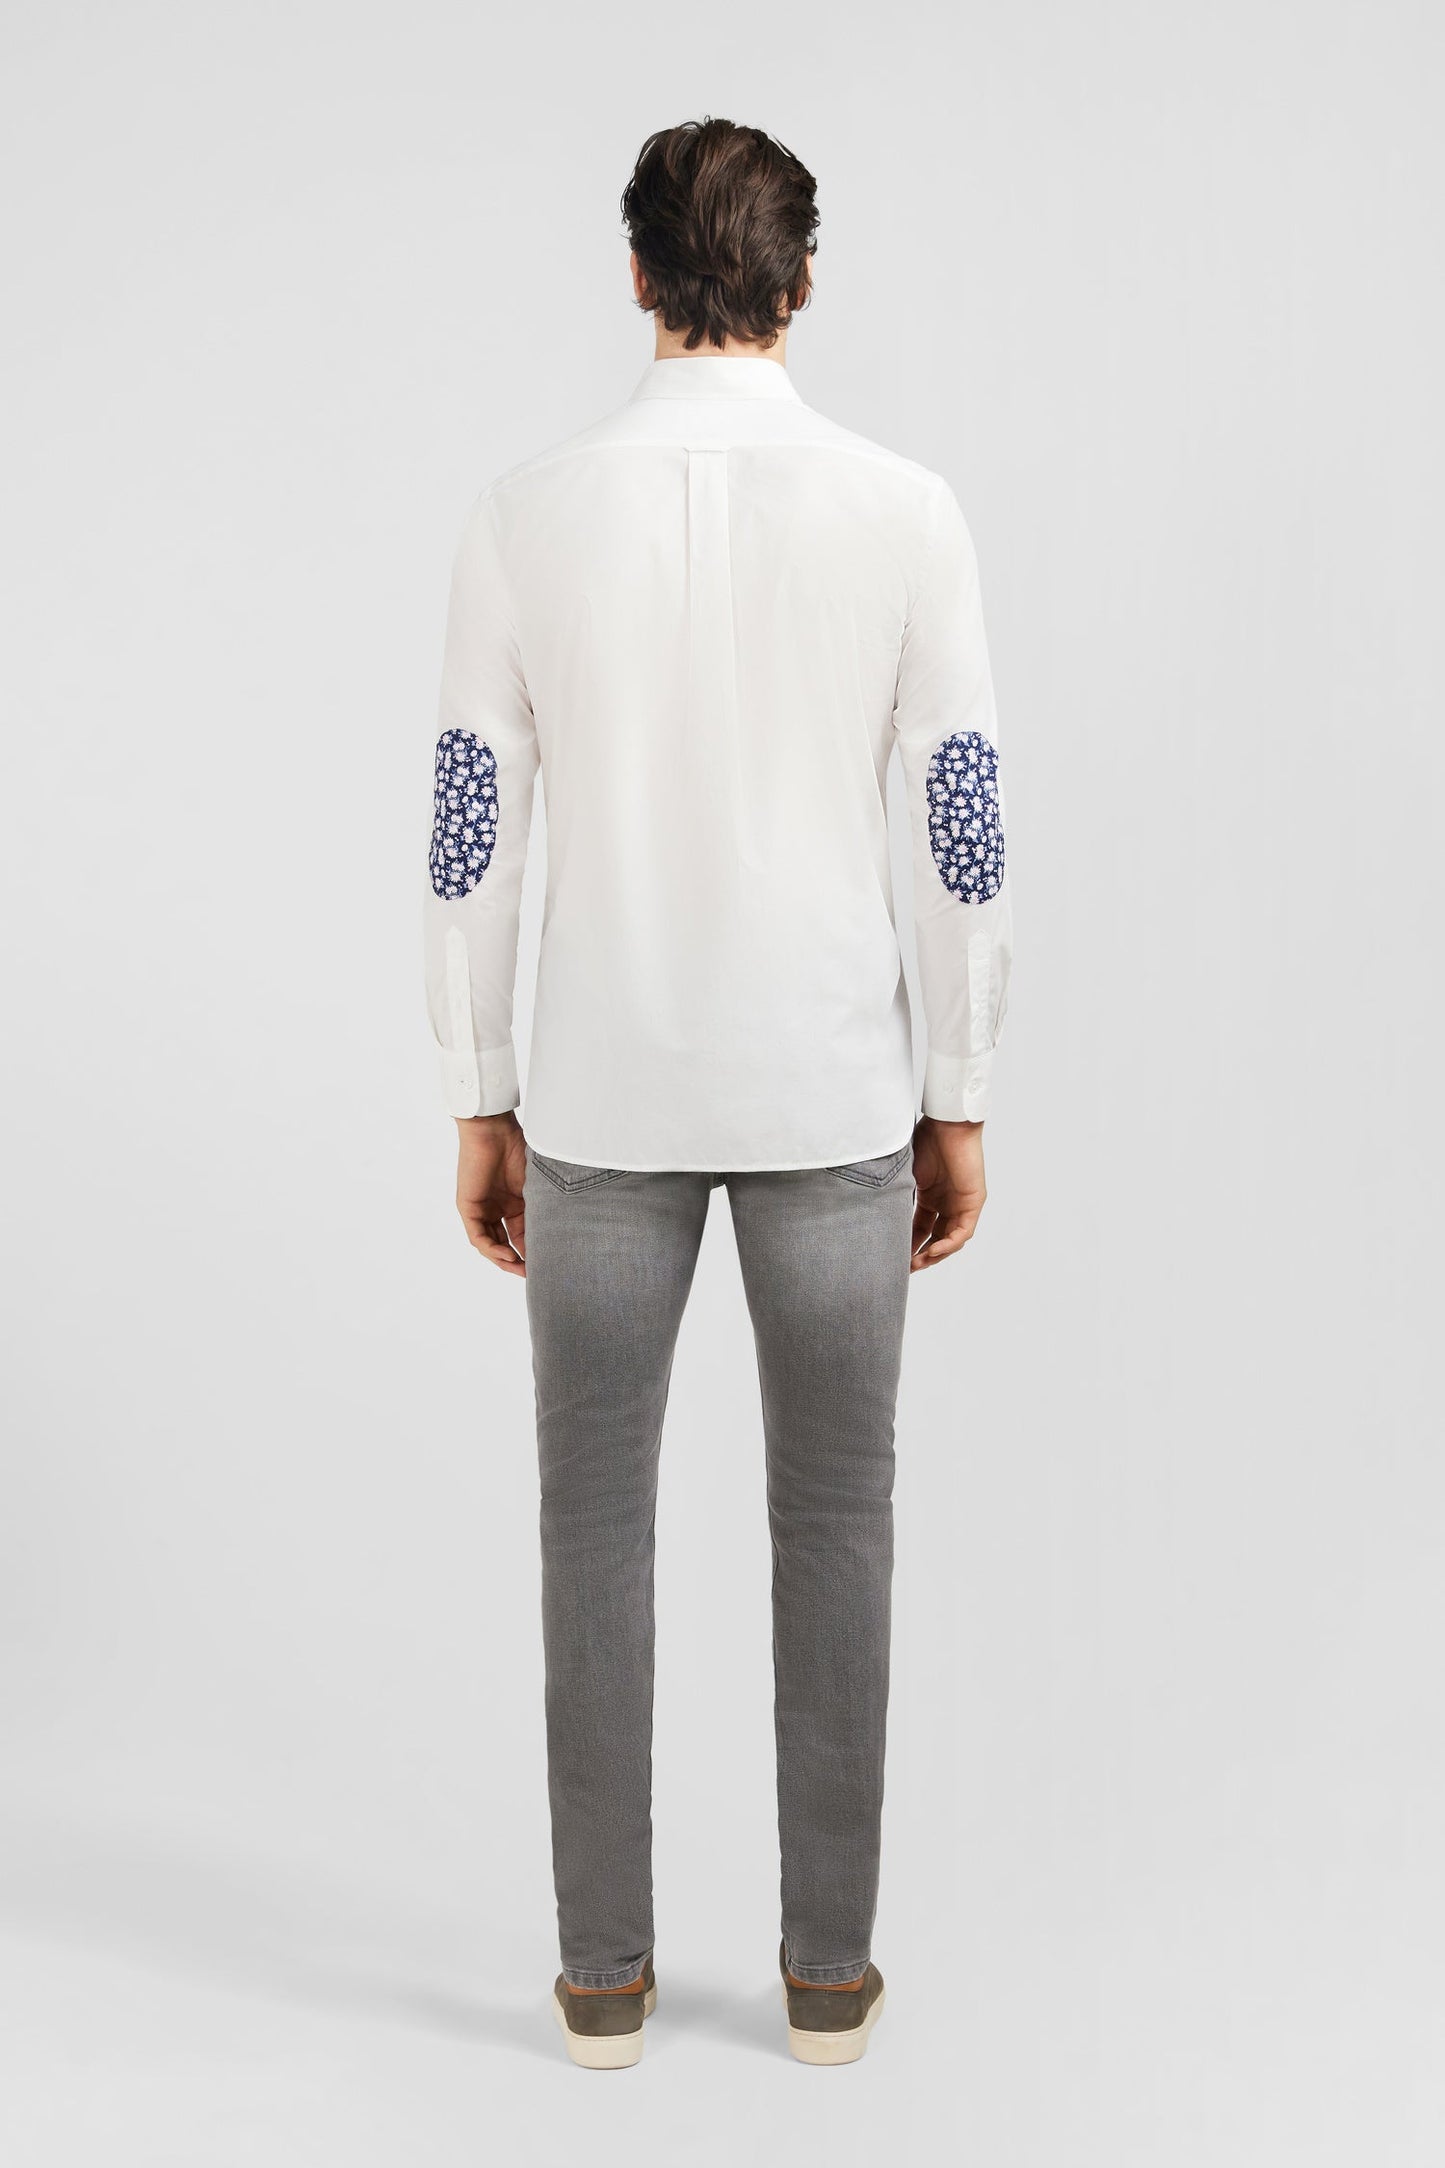 White shirt with floral elbow patches - Image 7